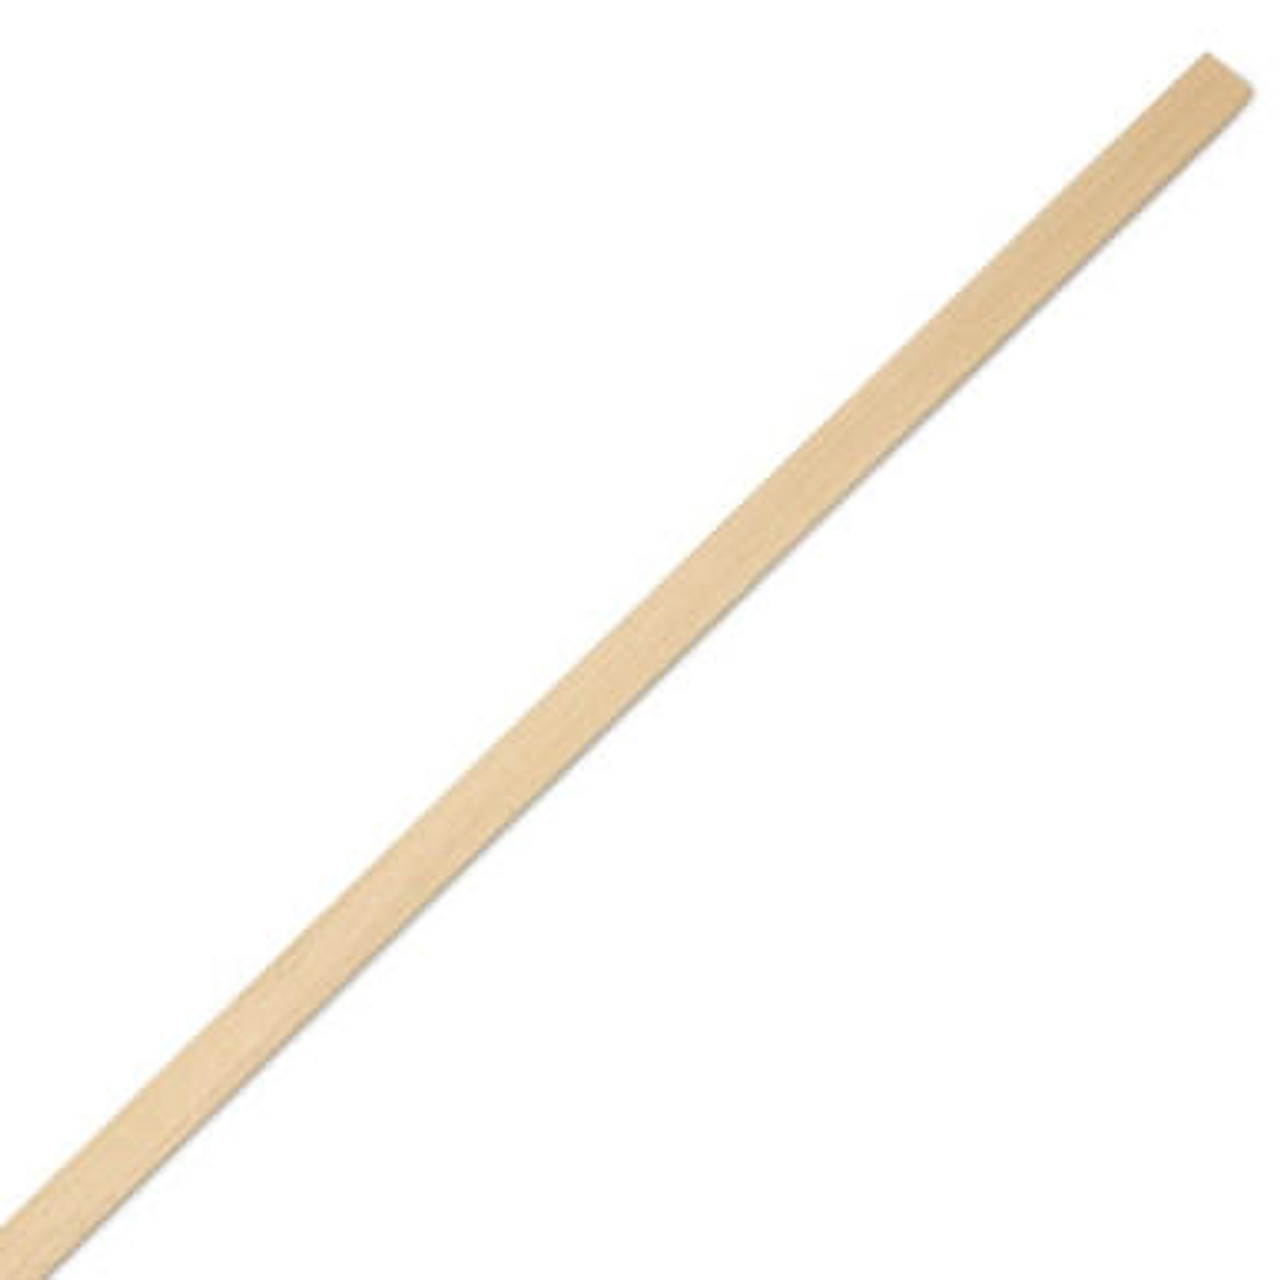 Woodpeckers Wood Square Dowel Rods 3/8 inch x 48 Pack of 10 Unfinished Wood Sticks for Crafts and Woodworking